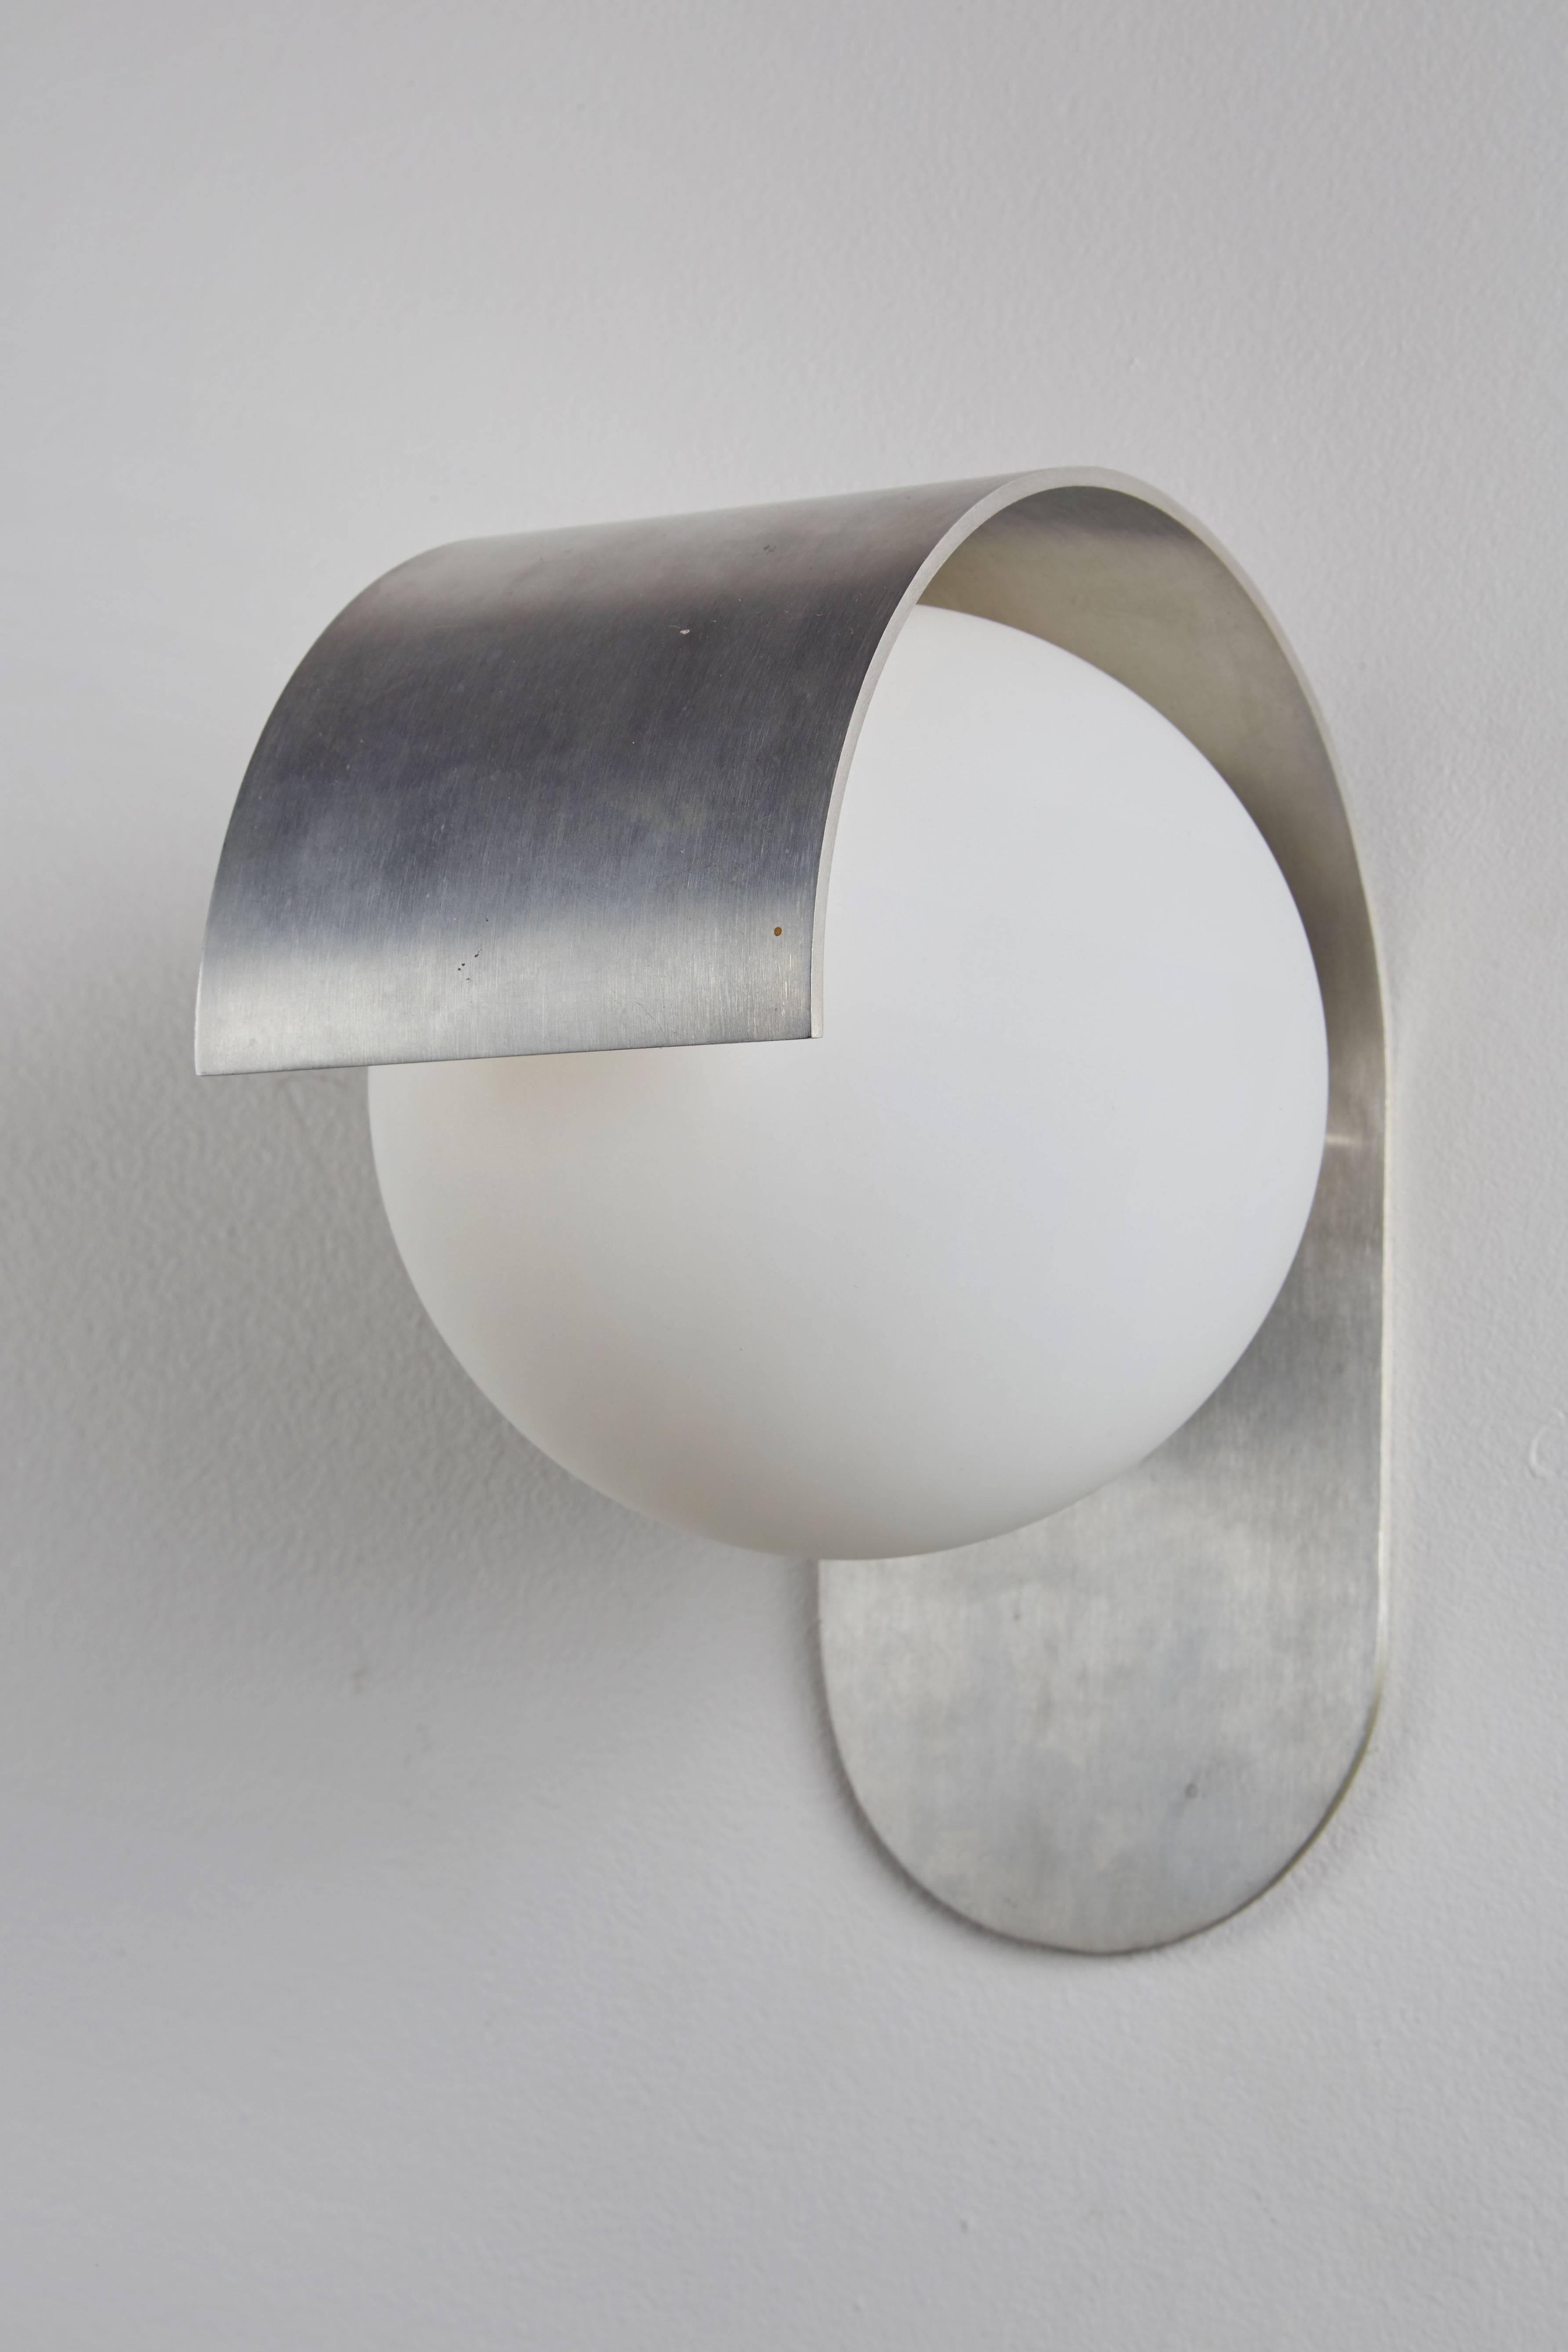 Pair of Brushed Aluminum and Satin Glass Sconces by Lumi 2